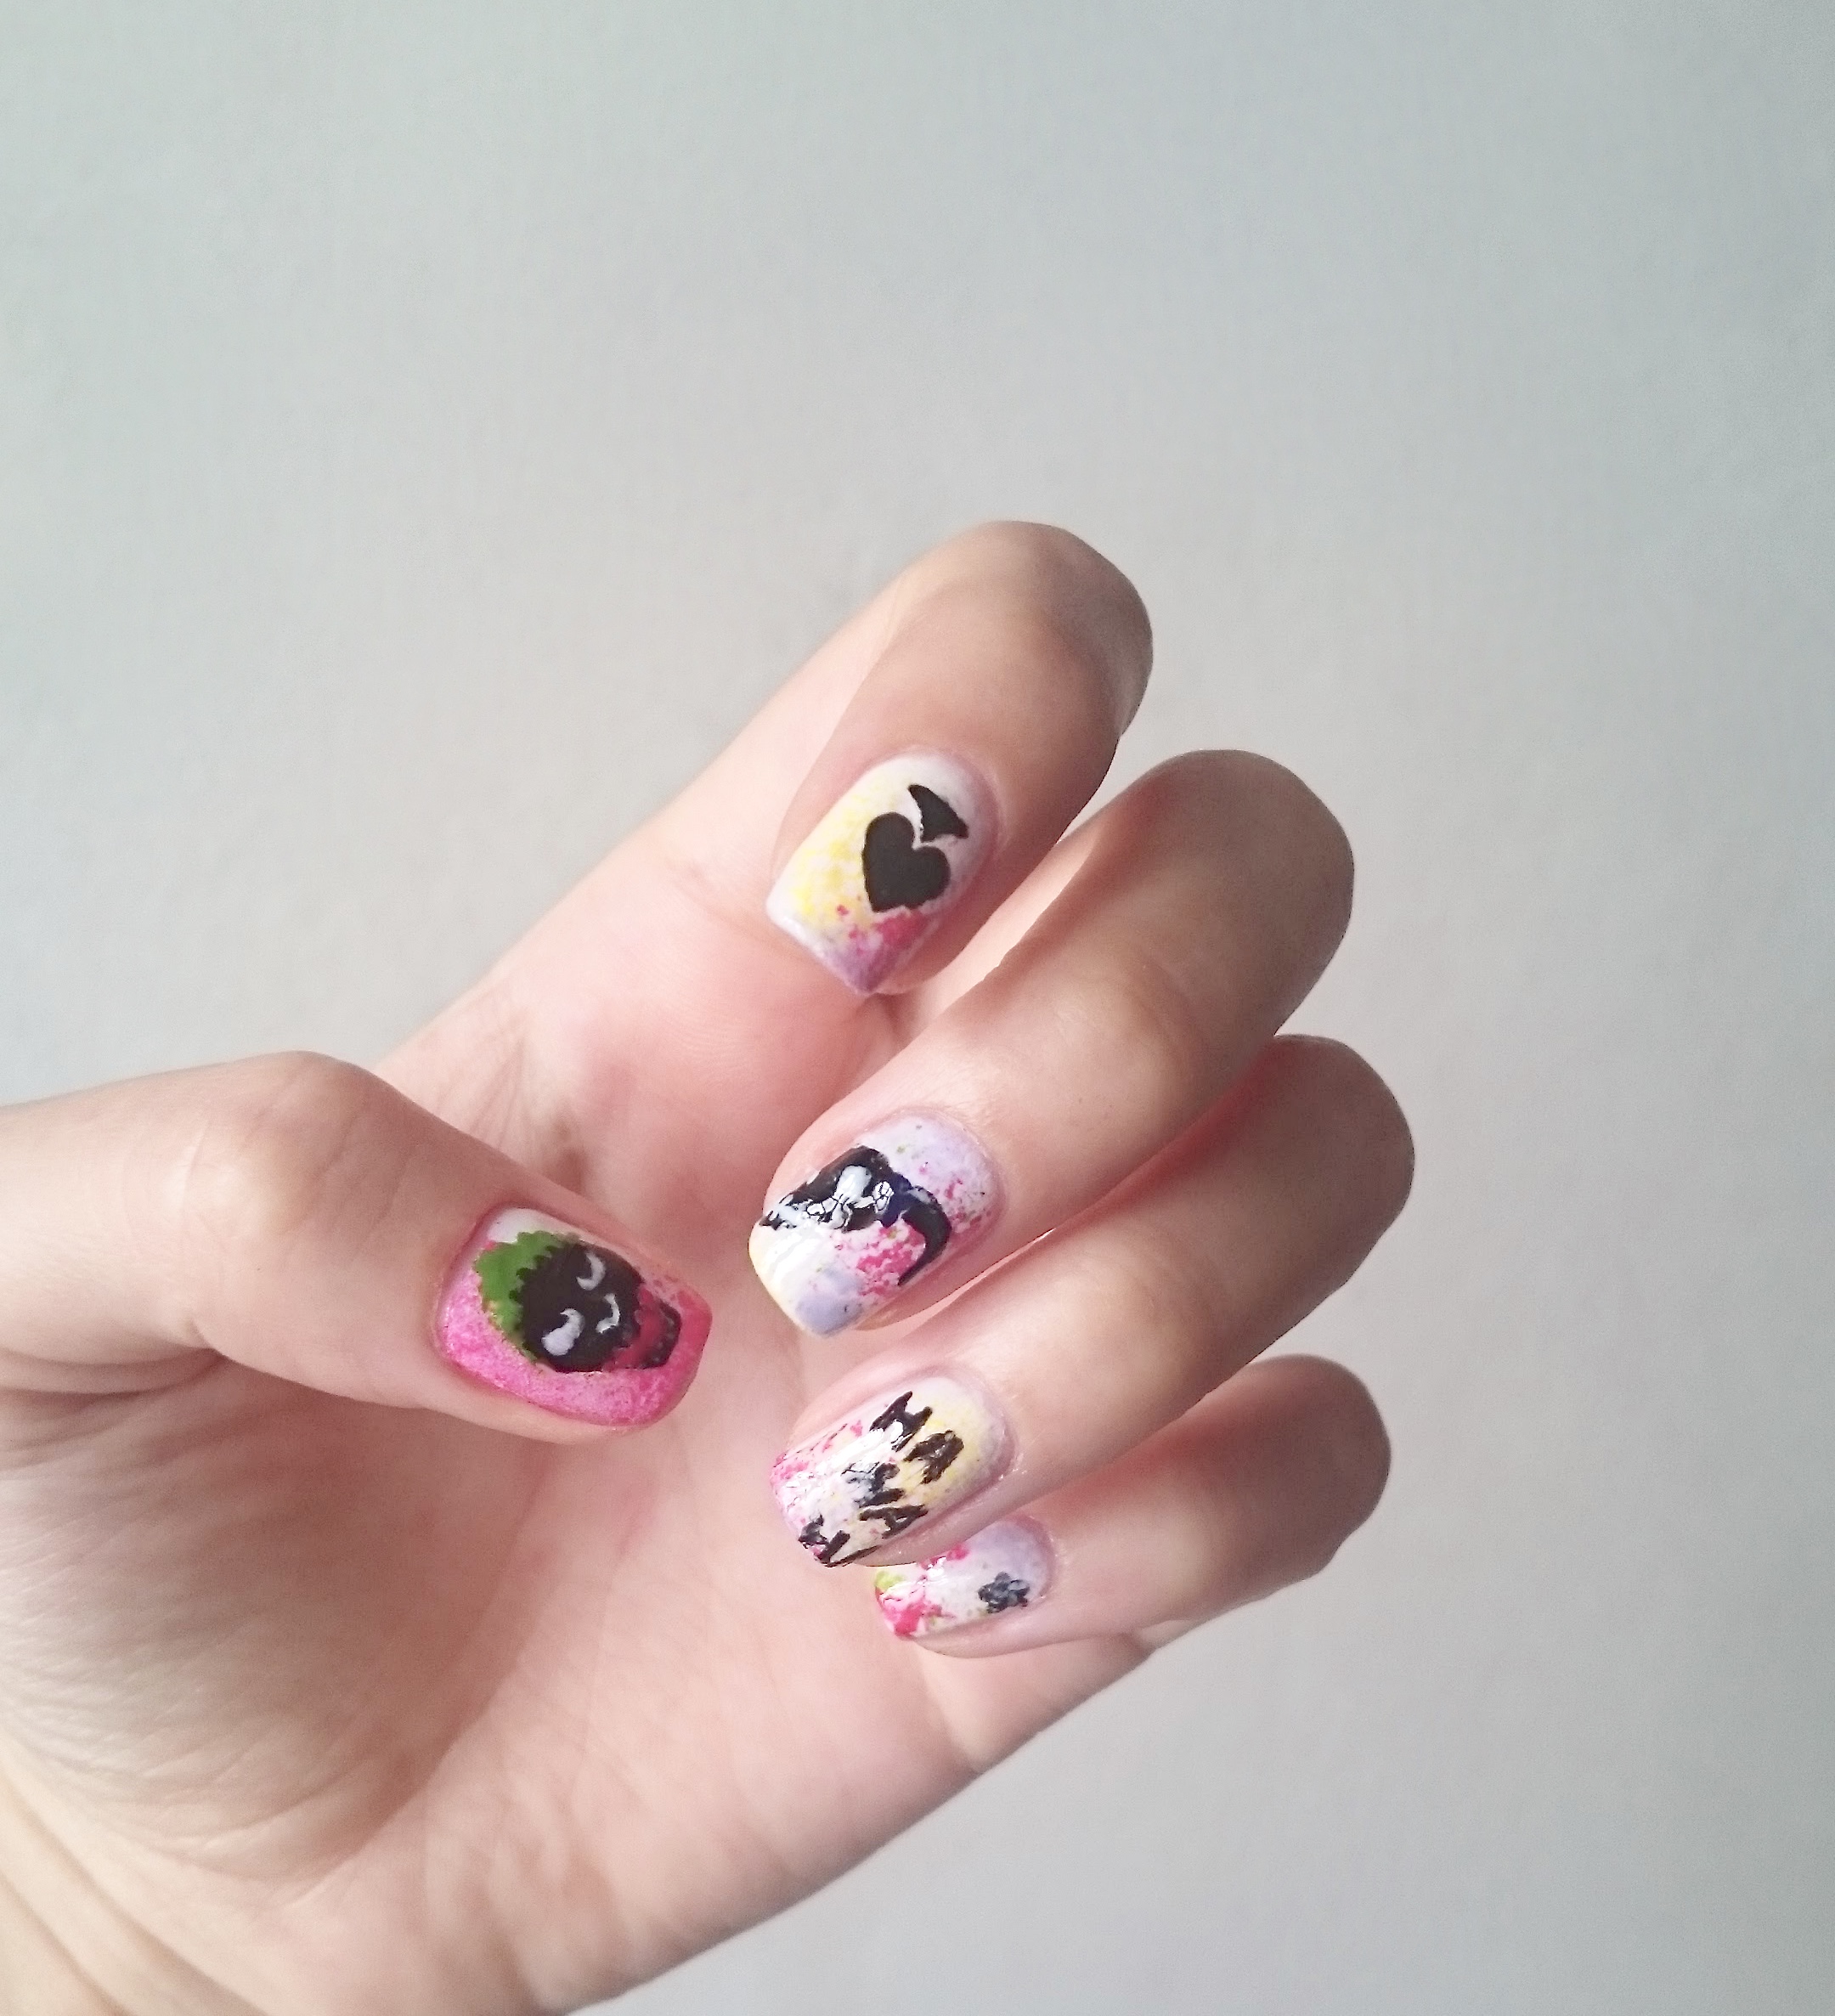 What are the latest nail art designs for a bride? - Quora